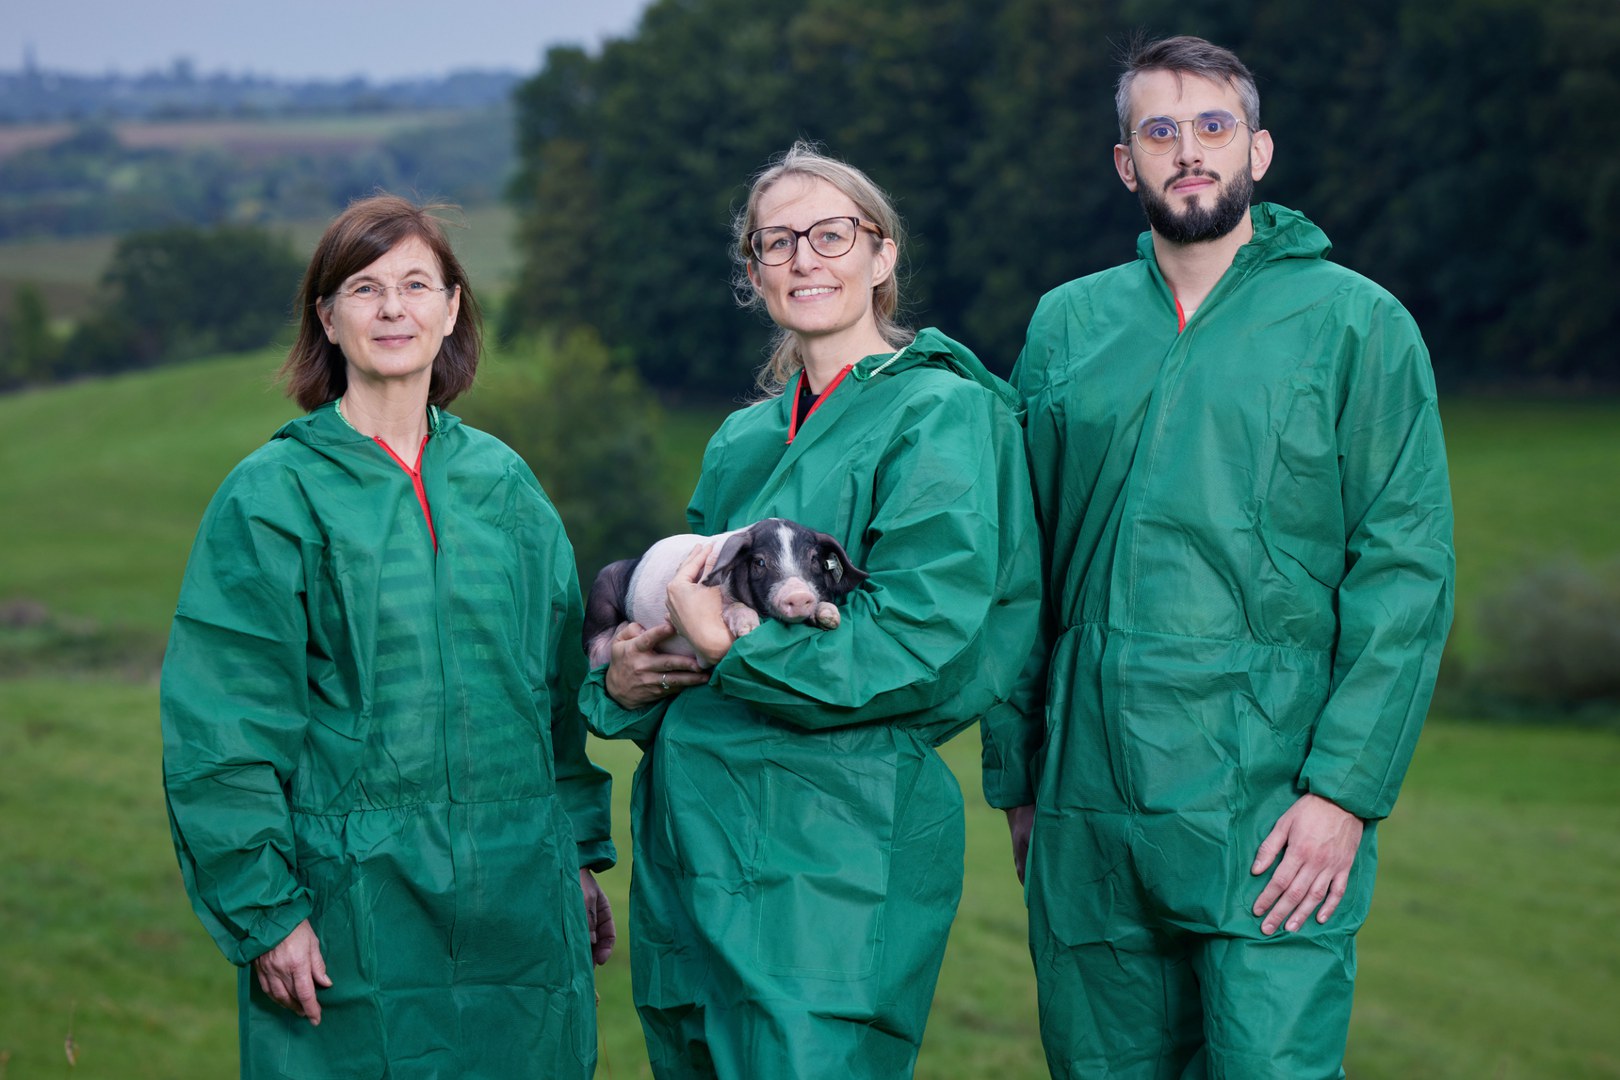 The team (left to right) in hygienic protective clothing with a piglet: - Prof. Dr. Monika Hartmann, Jeanette Klink-Lehmann and Milan Tatic at the Frankenforst Campus in Vinxel in the Siebengebirge region.